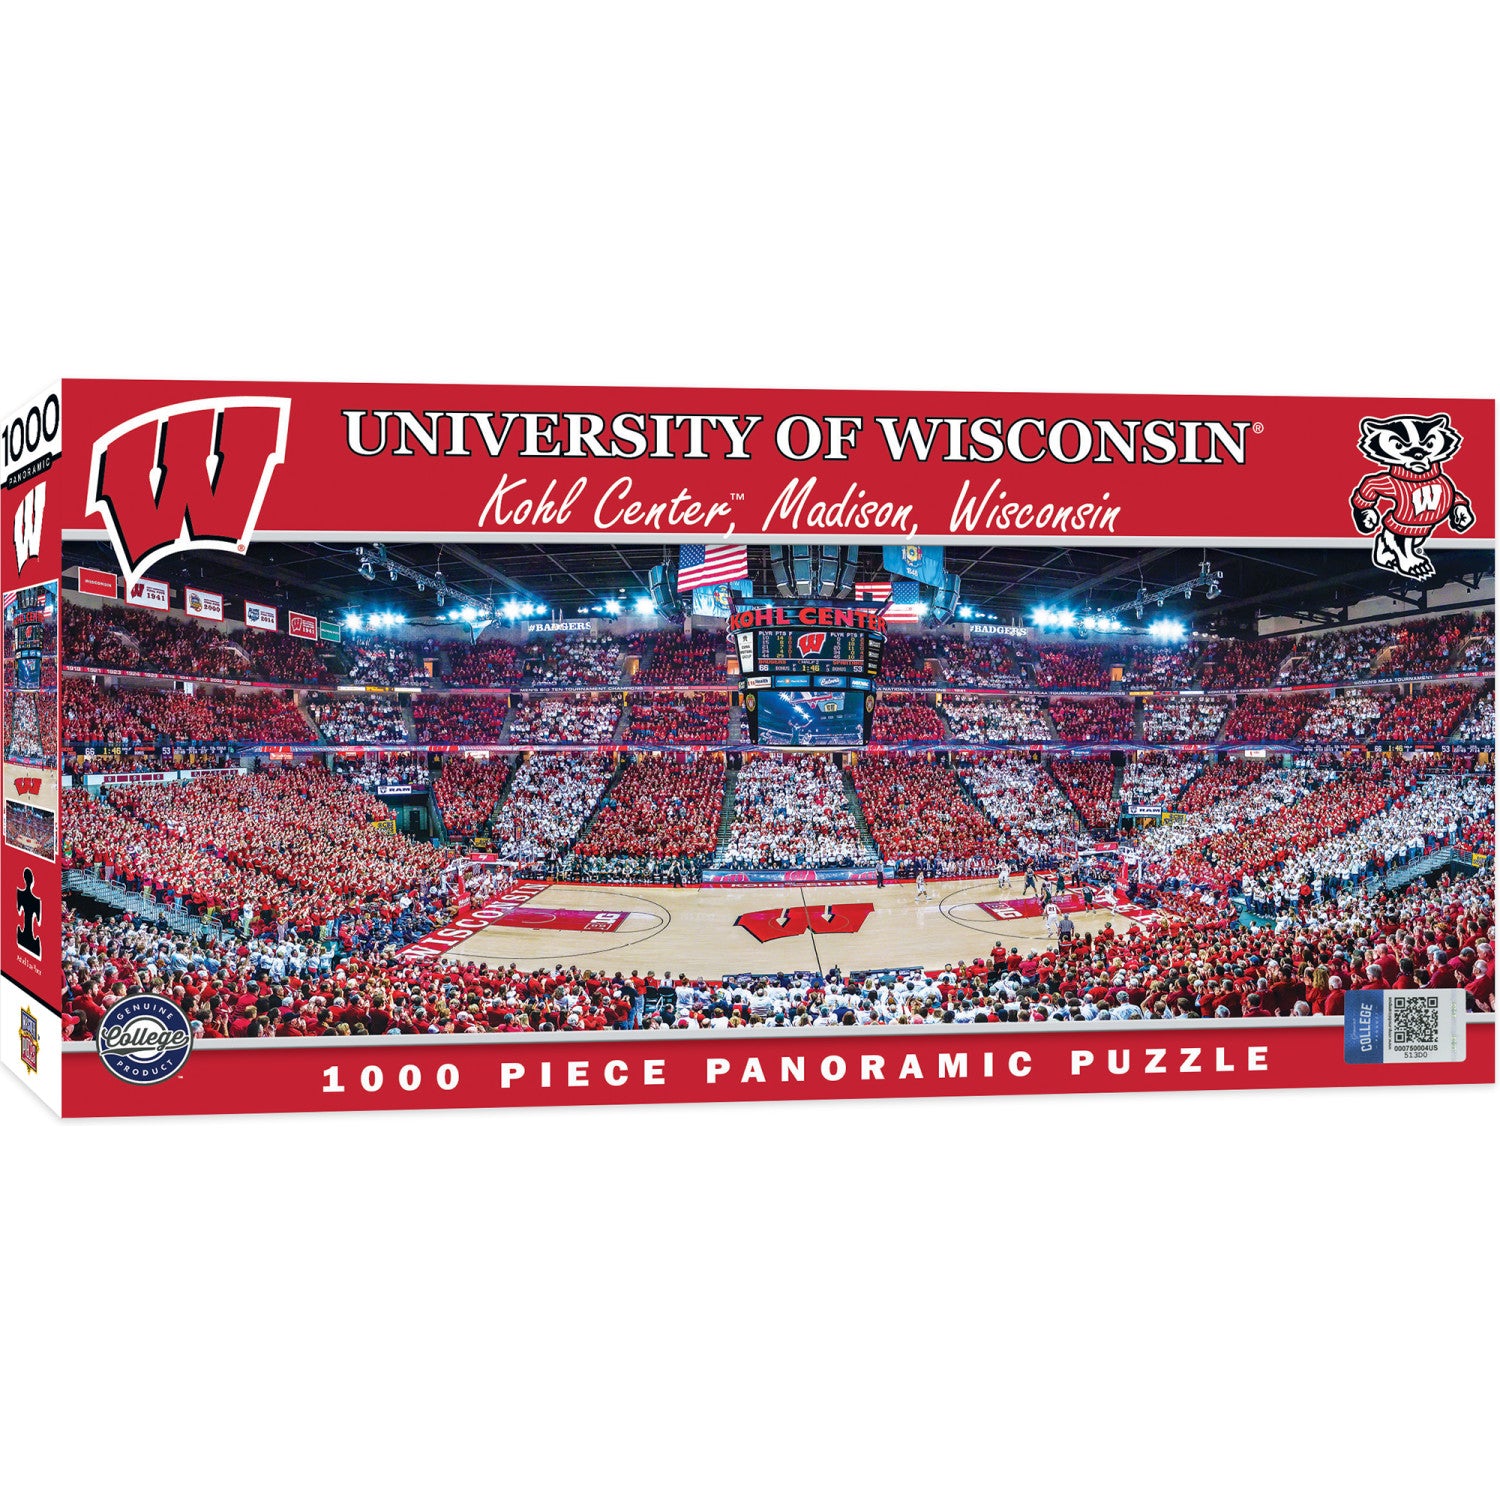 Wisconsin Badgers - 1000 Piece Panoramic Jigsaw Puzzle - Basketball